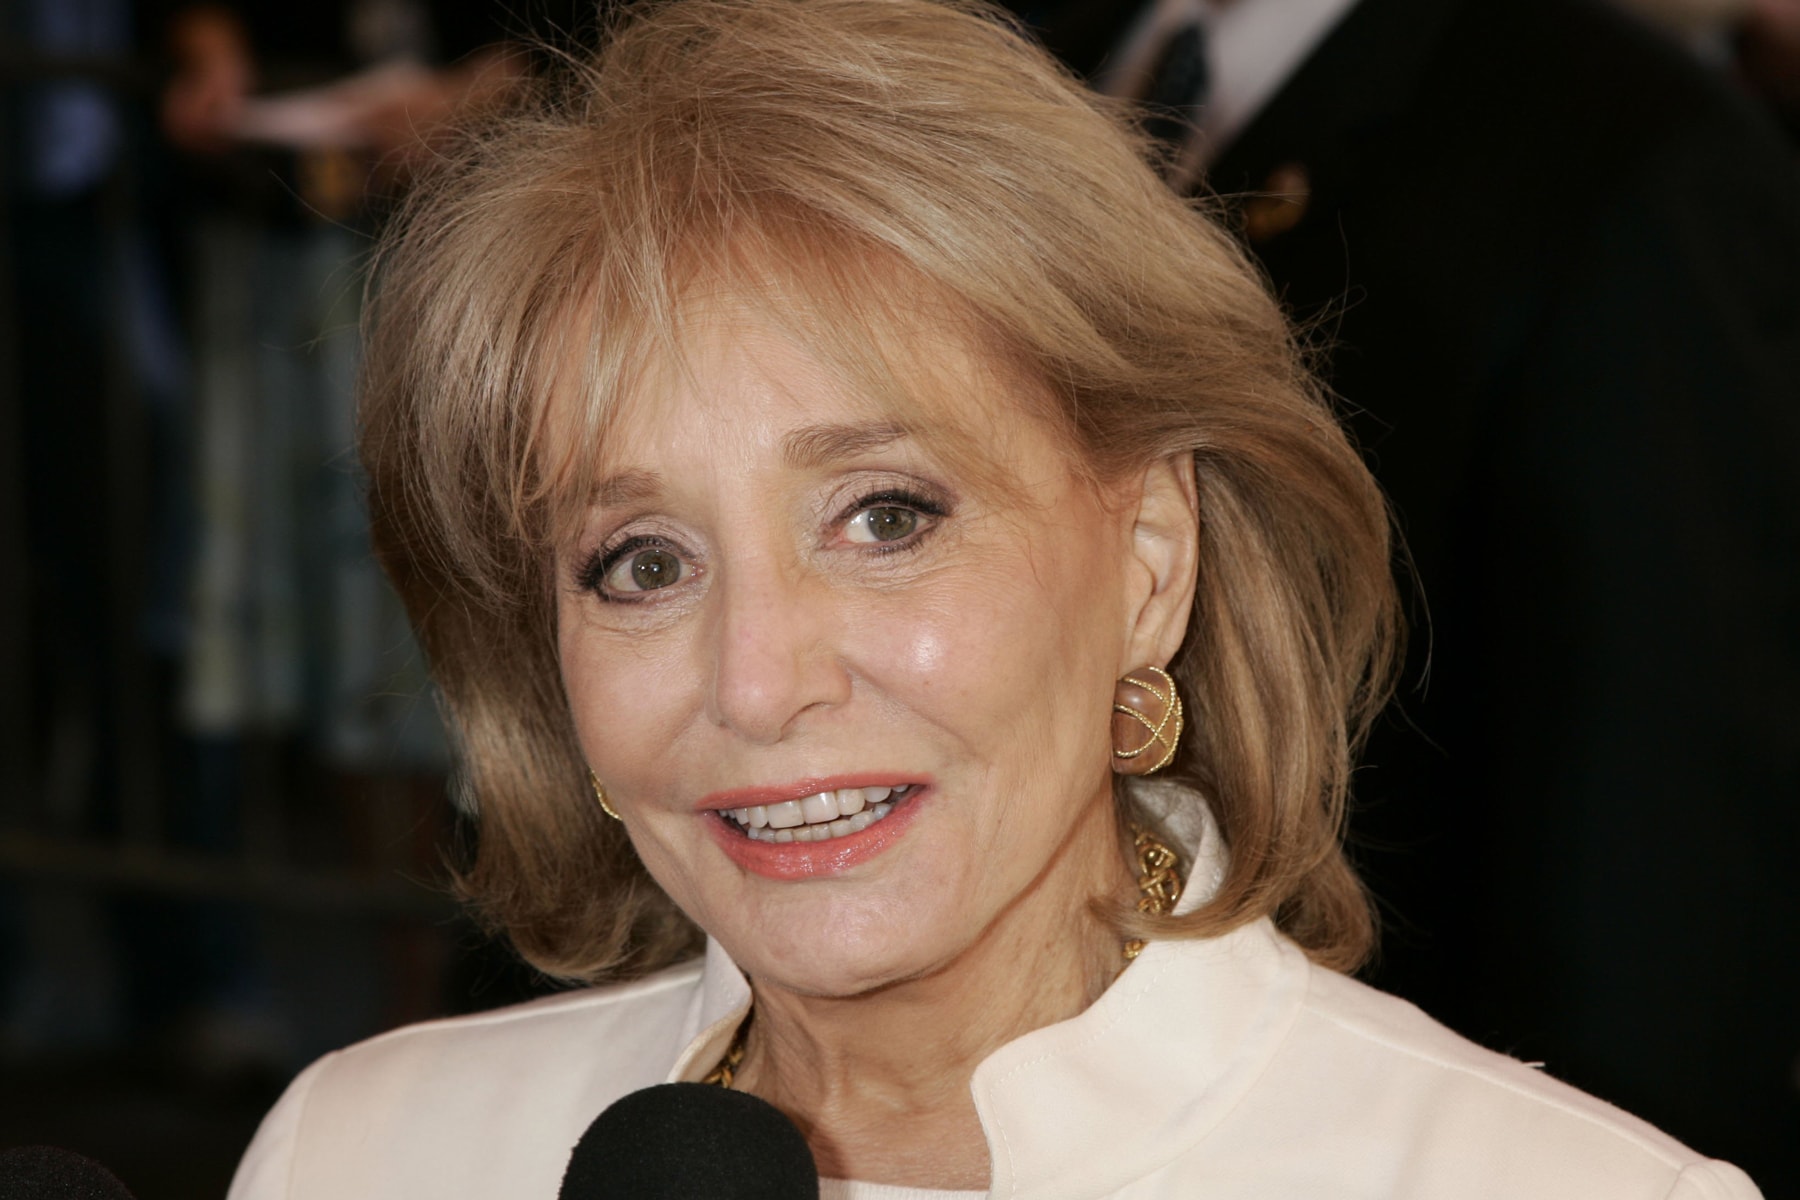 Barbara Walters dead age 93 nbc abc 20/20 the view interviews pop-culture television daily morning america USA Today